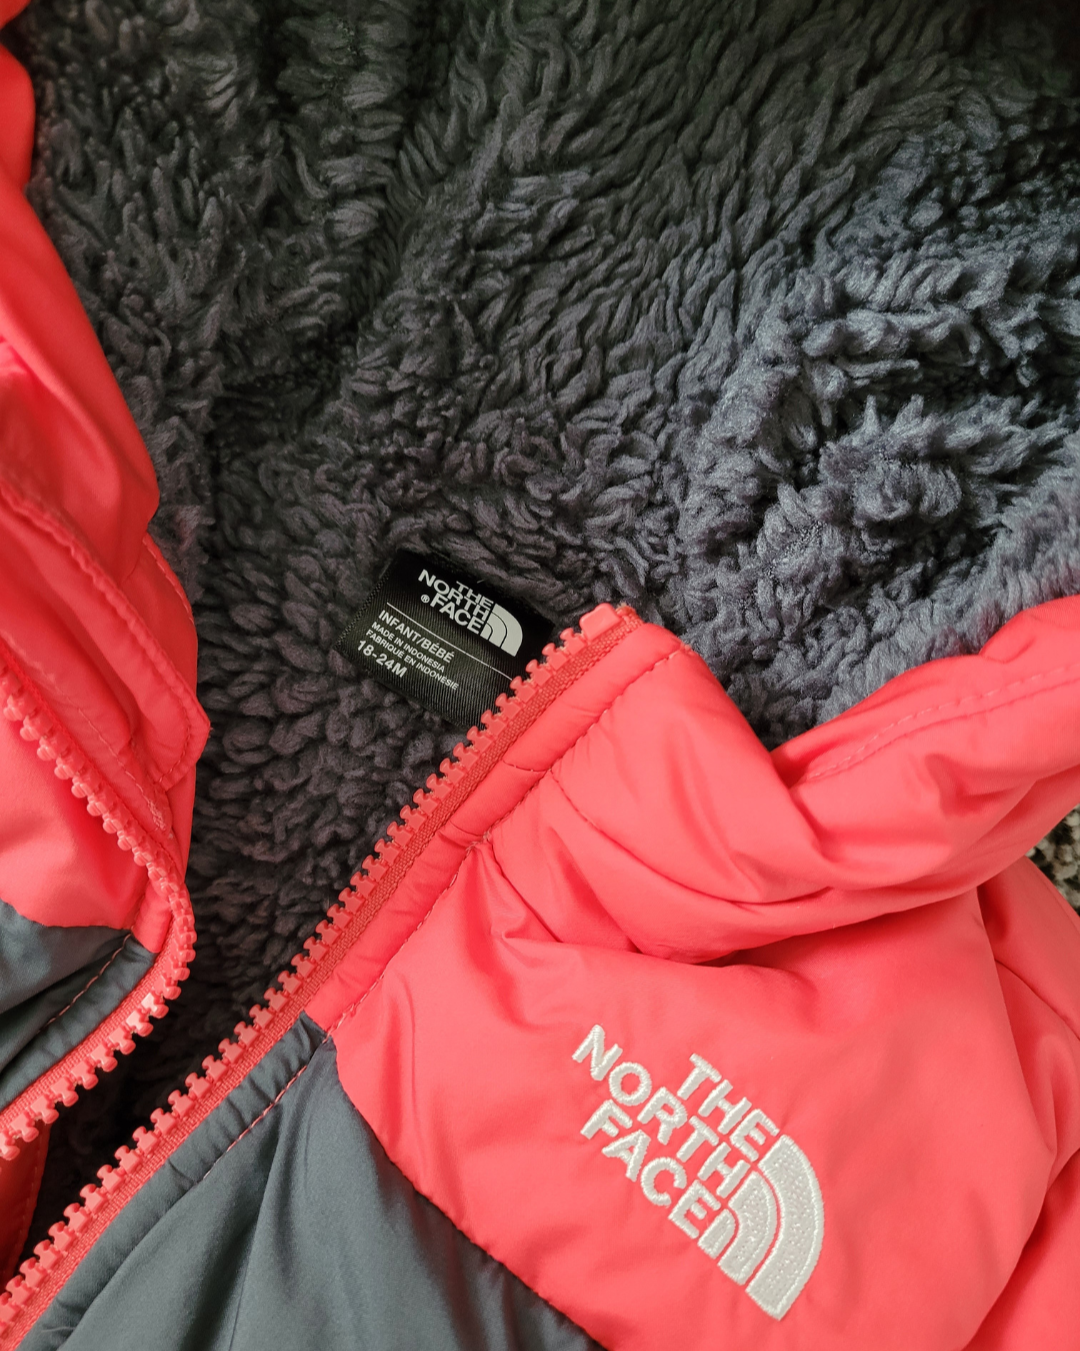 Used Baby North Down Hooded Jacket by The North Face 18-24M